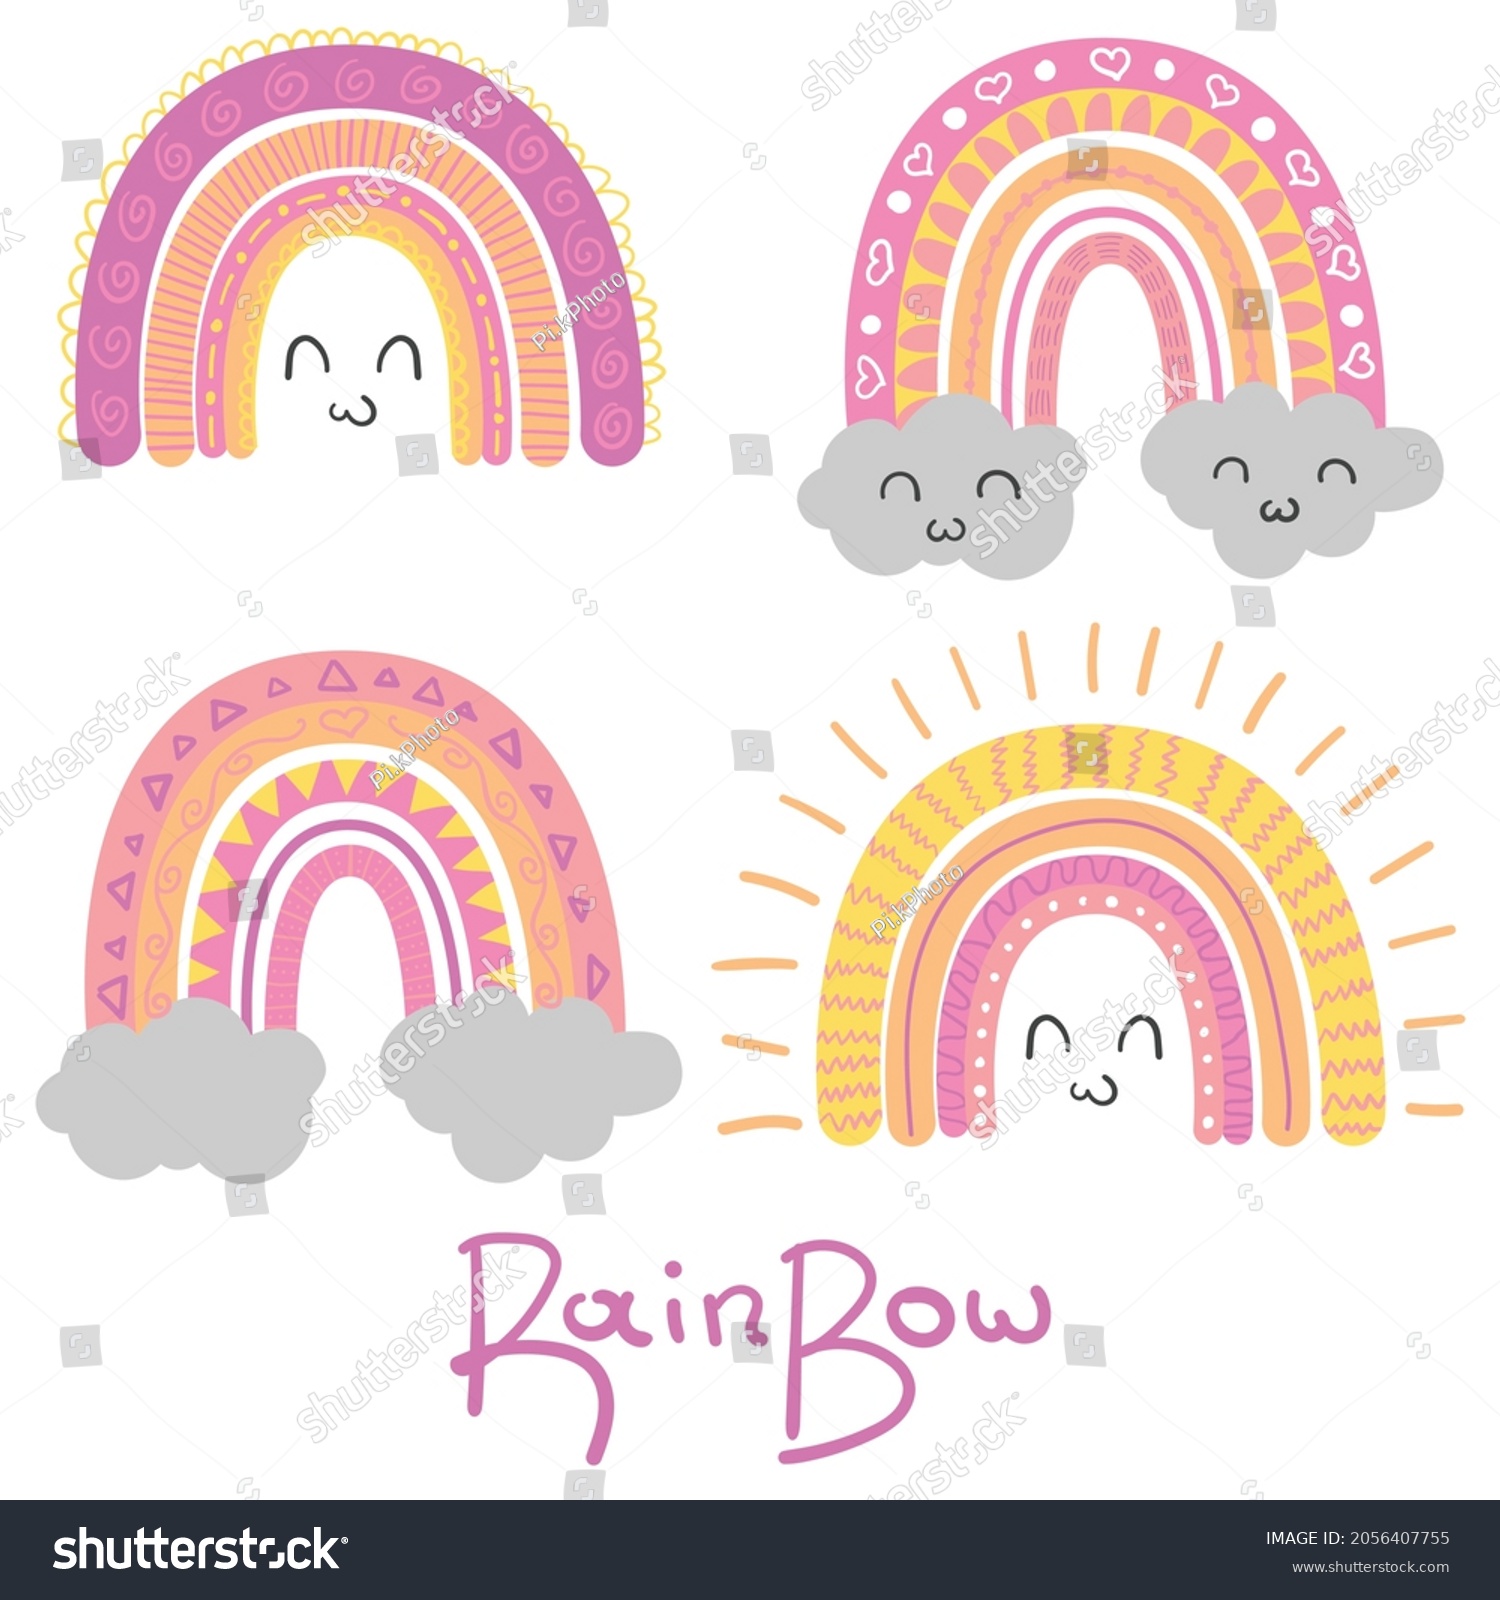 SVG of Baby Girl Rainbow Clipart, Nursery Rainbow Decoration, Svg, Rainbow Clipart Bundle, Pastel Colors, Rainbow for Printing and for Cutting svg